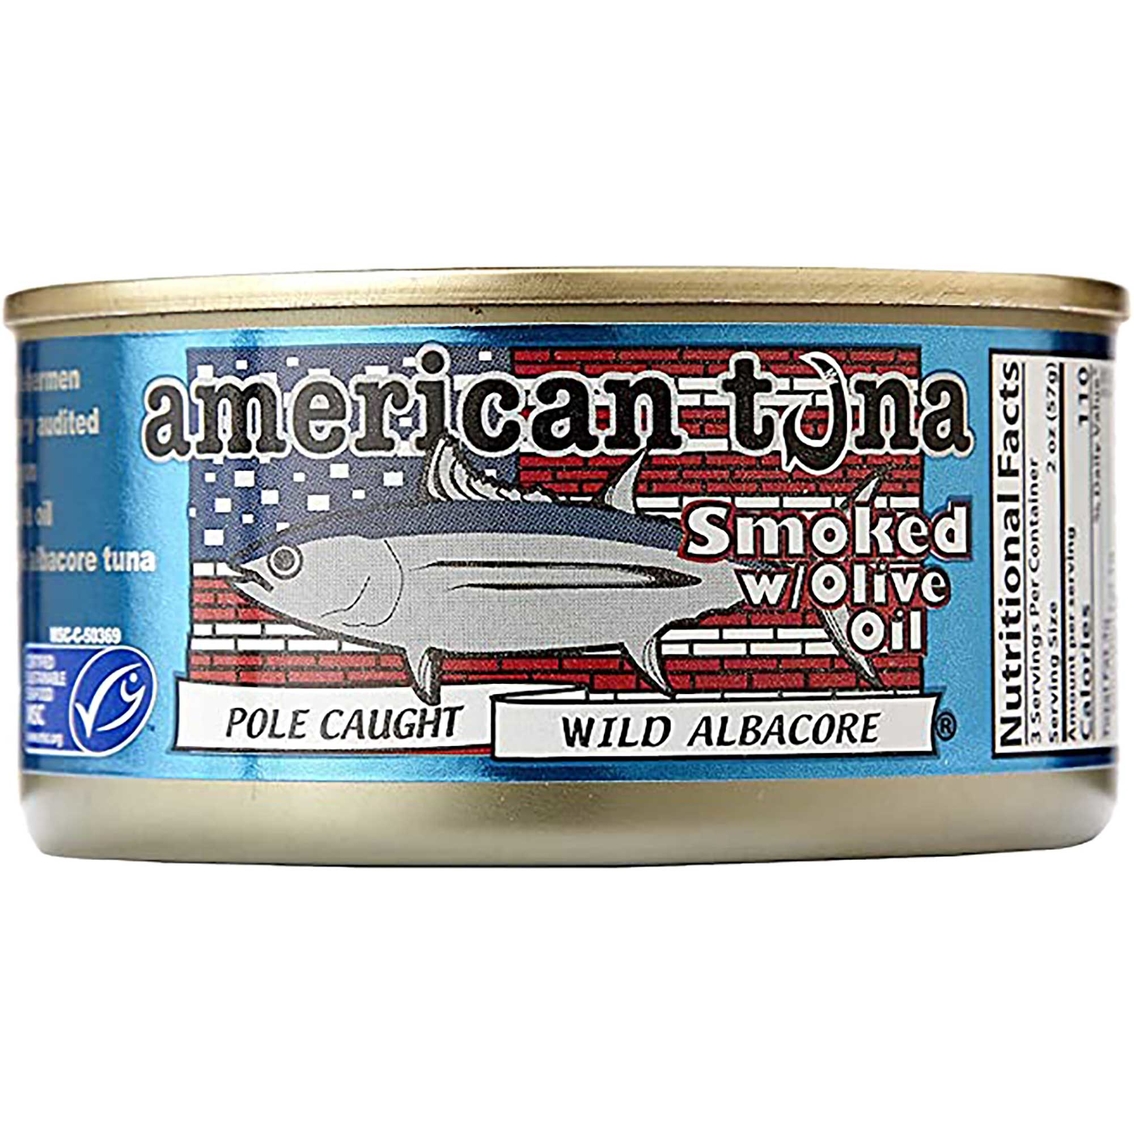 American Tuna Smoked In Olive Oil 6 Cans, 6 Oz. Each